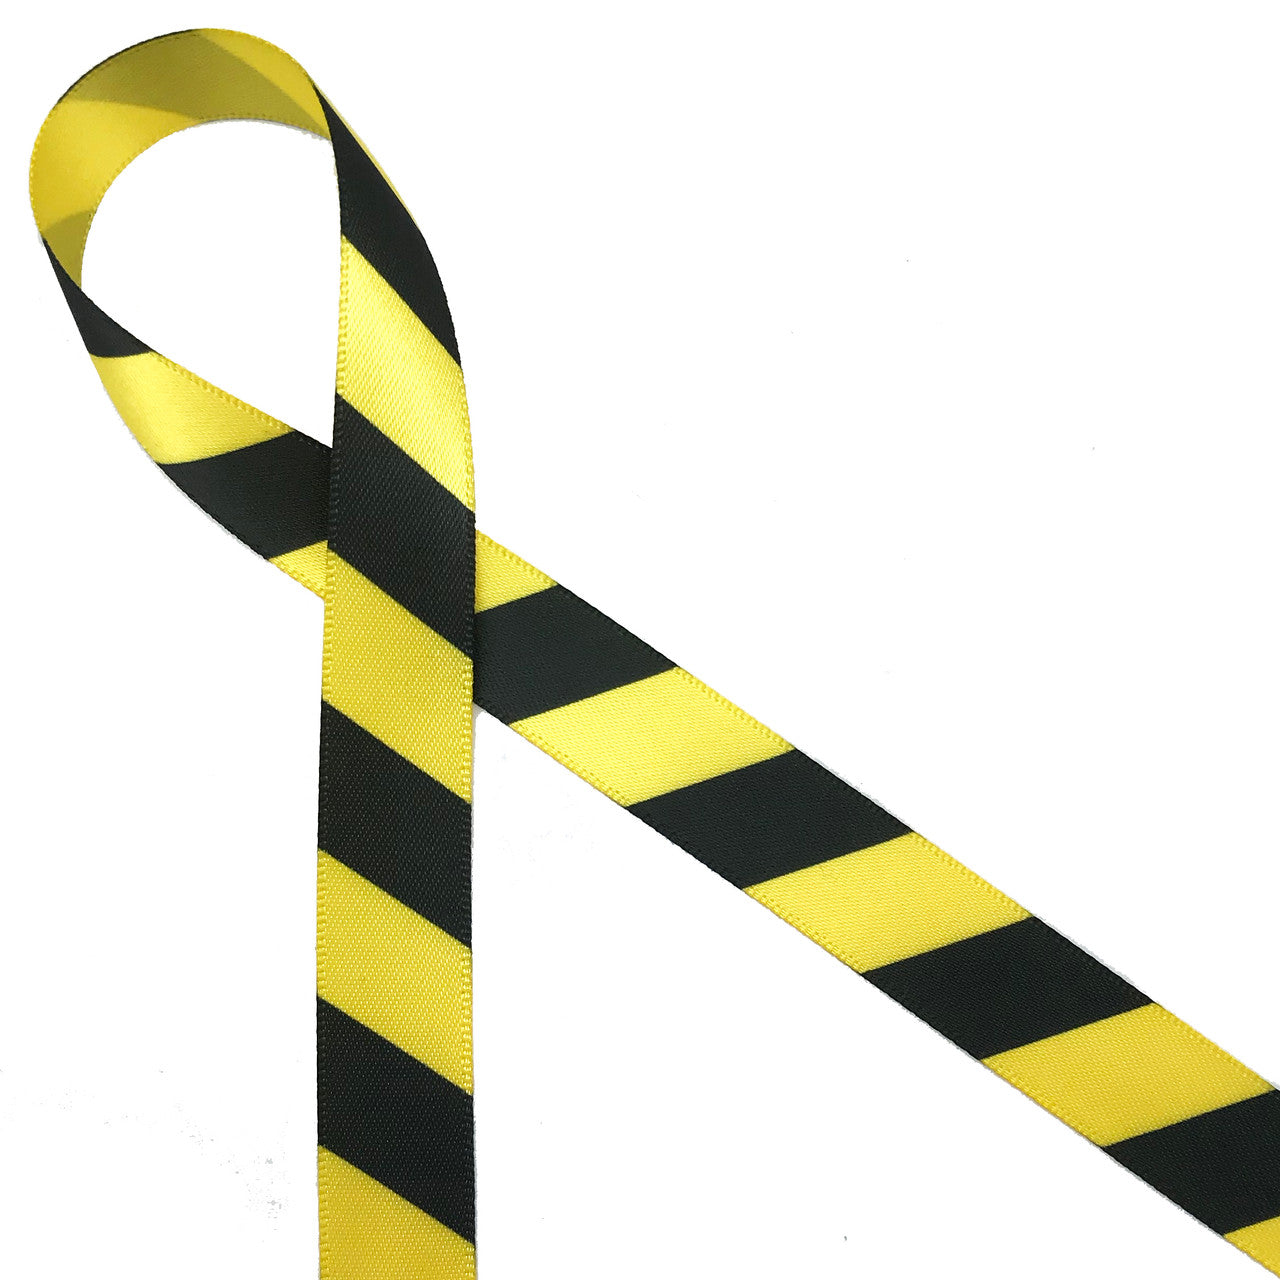 Black and yellow striped caution tape ribbon printed on 5/8" daffodil yellow single face satin ribbon makes for a fun addition to lots of part themes!